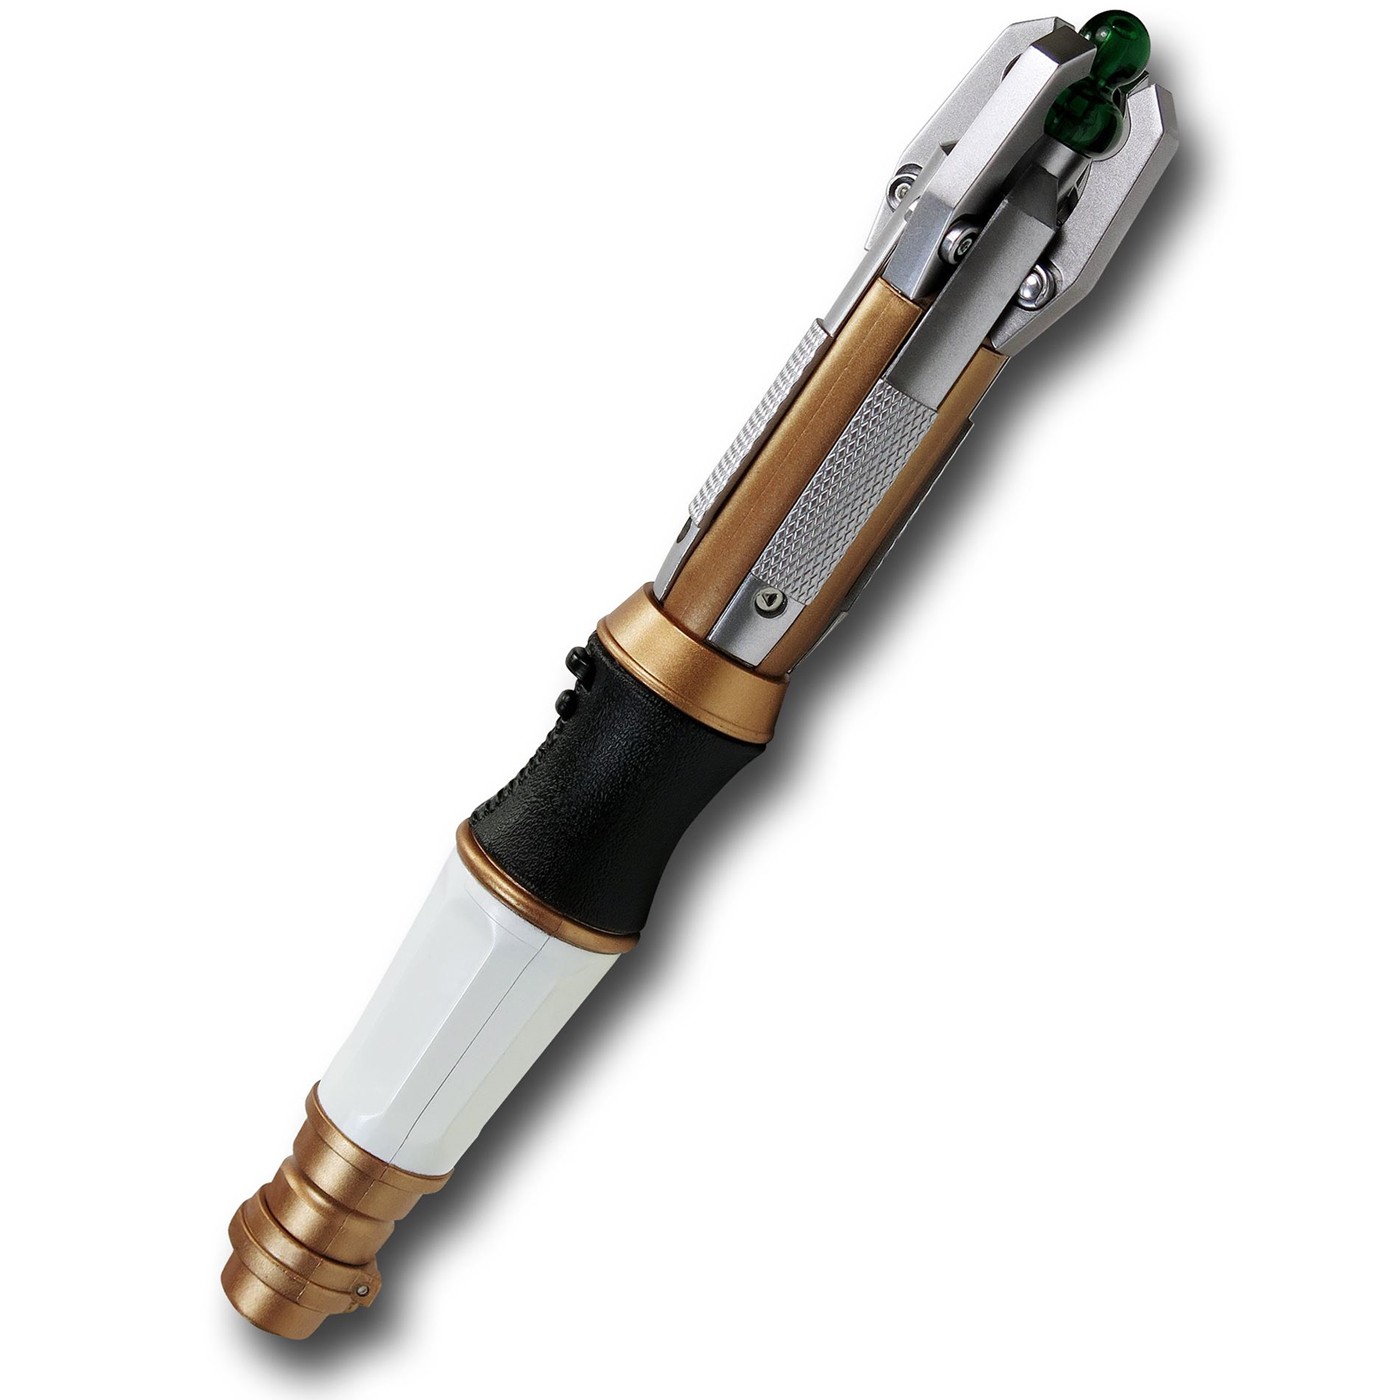 all doctor who sonic screwdrivers